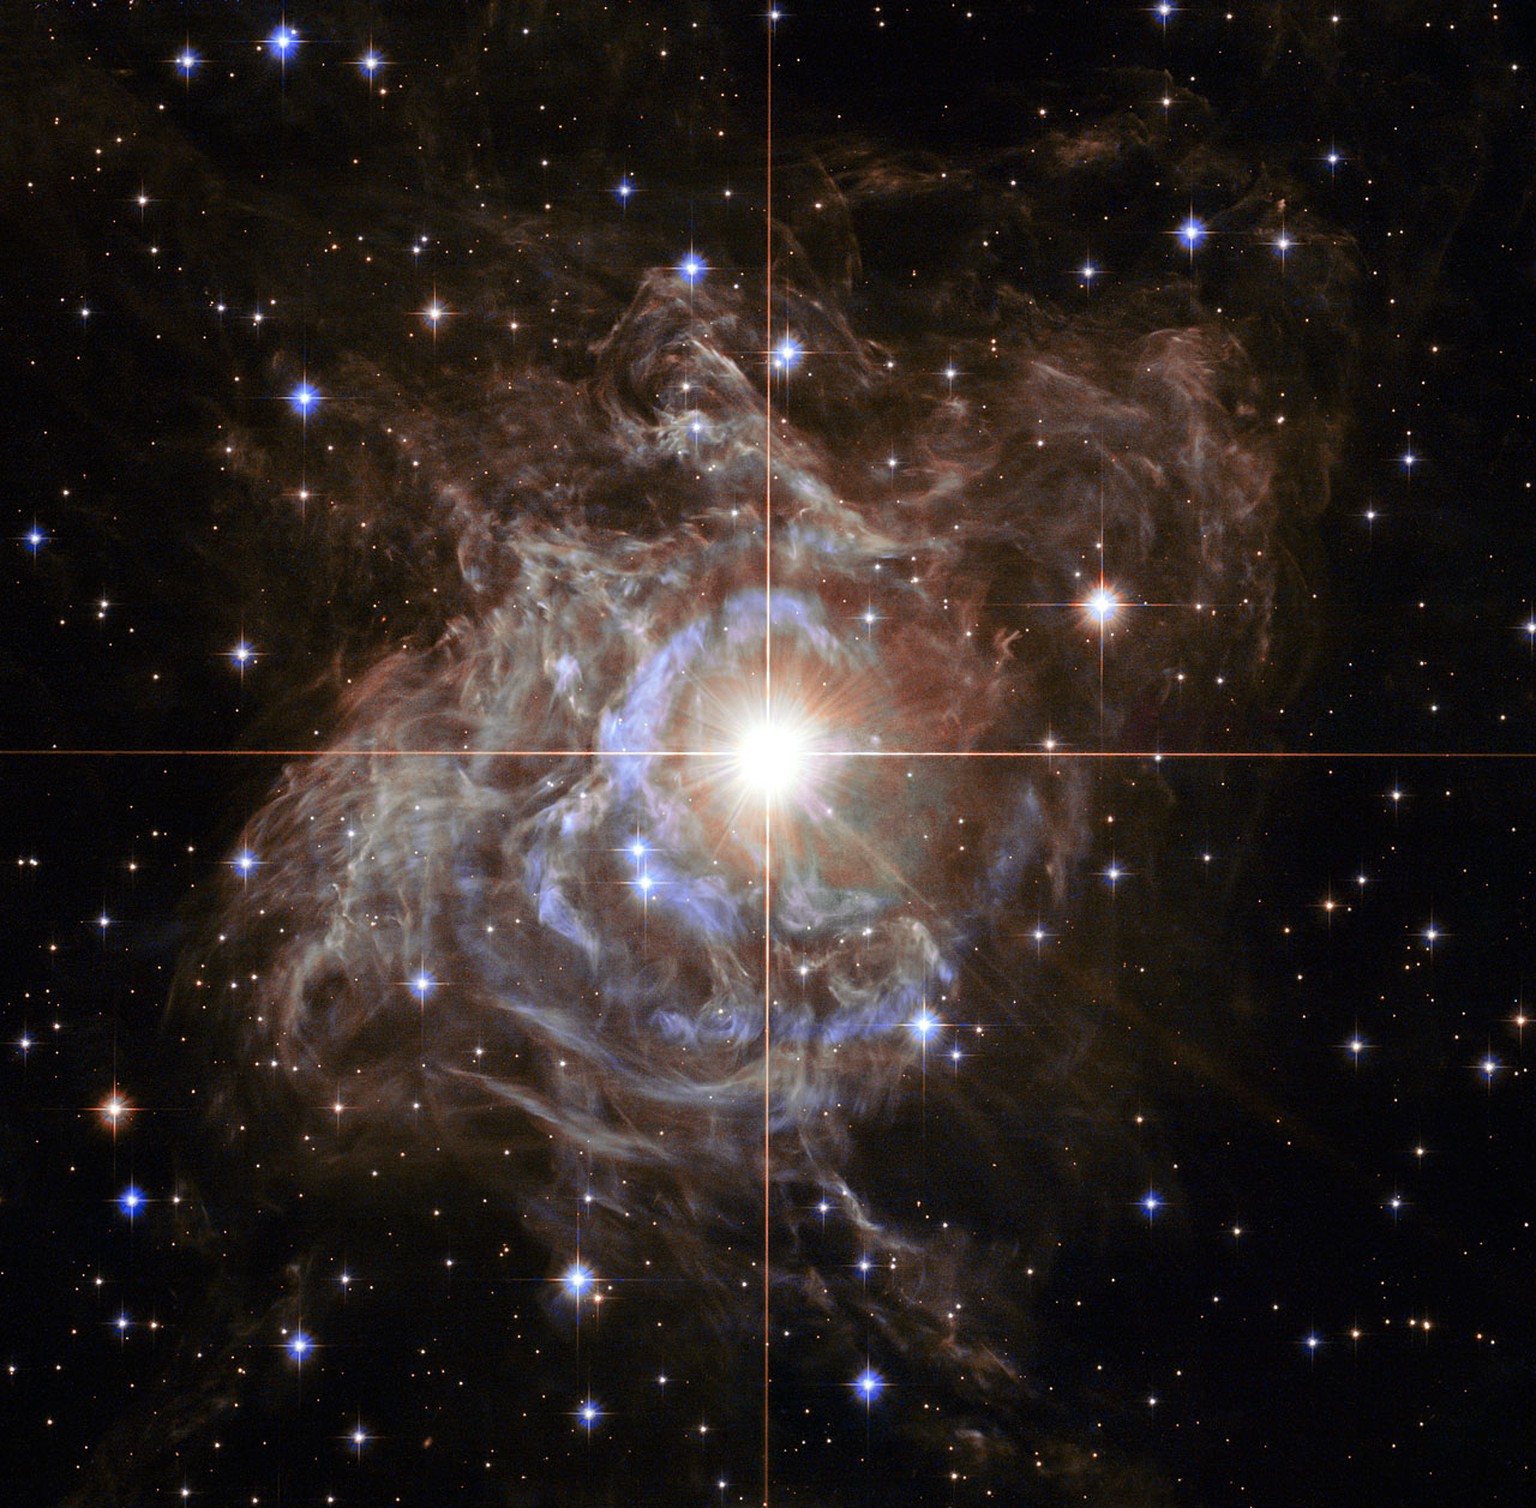 This Hubble image shows RS Puppis, a type of variable star known as a Cepheid variable. As variable stars go, Cepheids have comparatively long periods — RS Puppis, for example, varies in brightness by ...